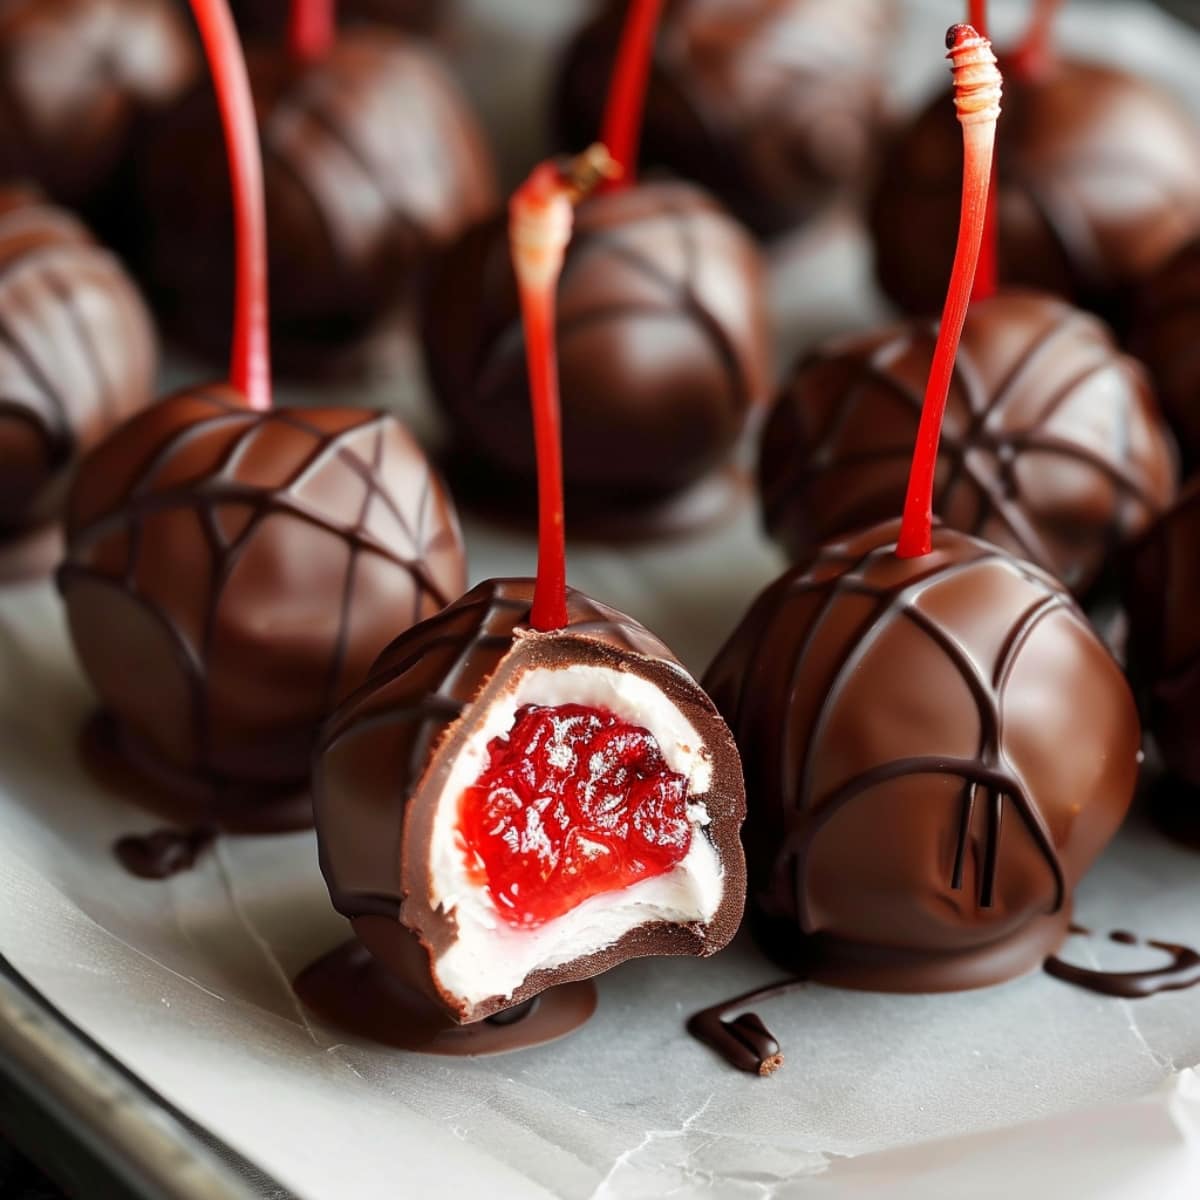 Chocolate covered cherries on a baking sheet